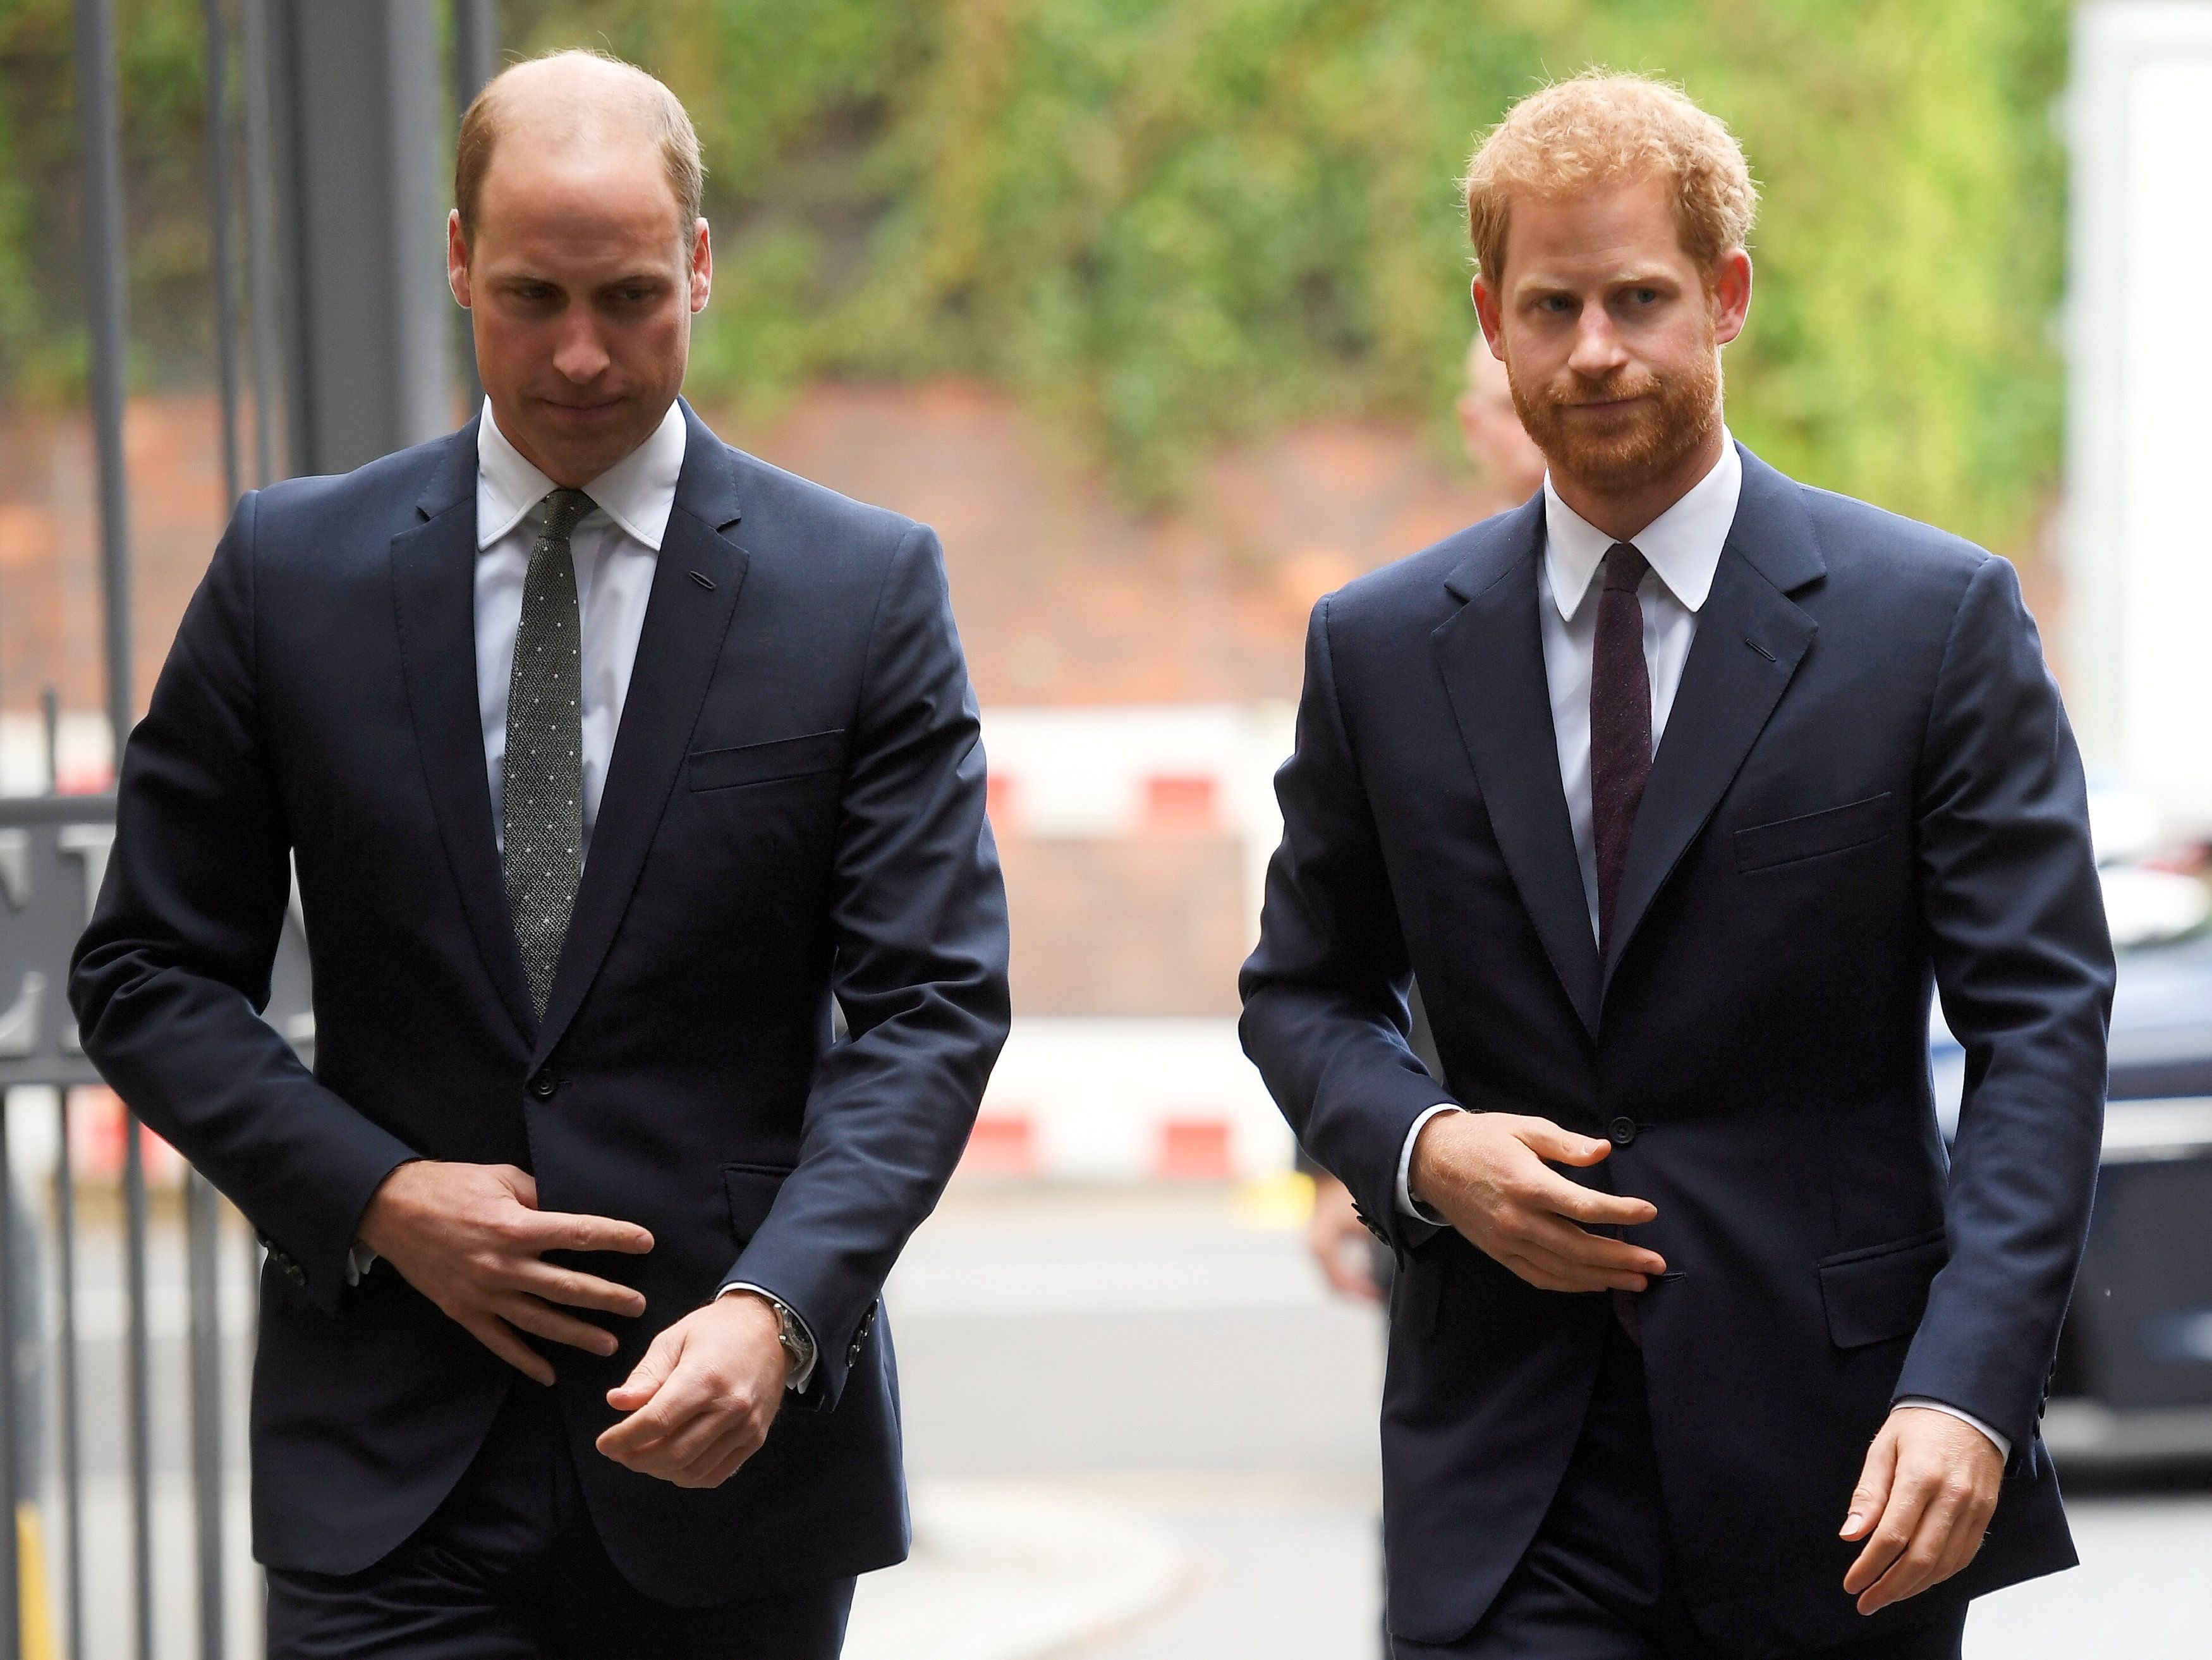 Prince William and Prince Harry during a visit to the Royal Foundation Support4Grenfell community hub on September 5, 2017 in London, England. | Source: Getty Images